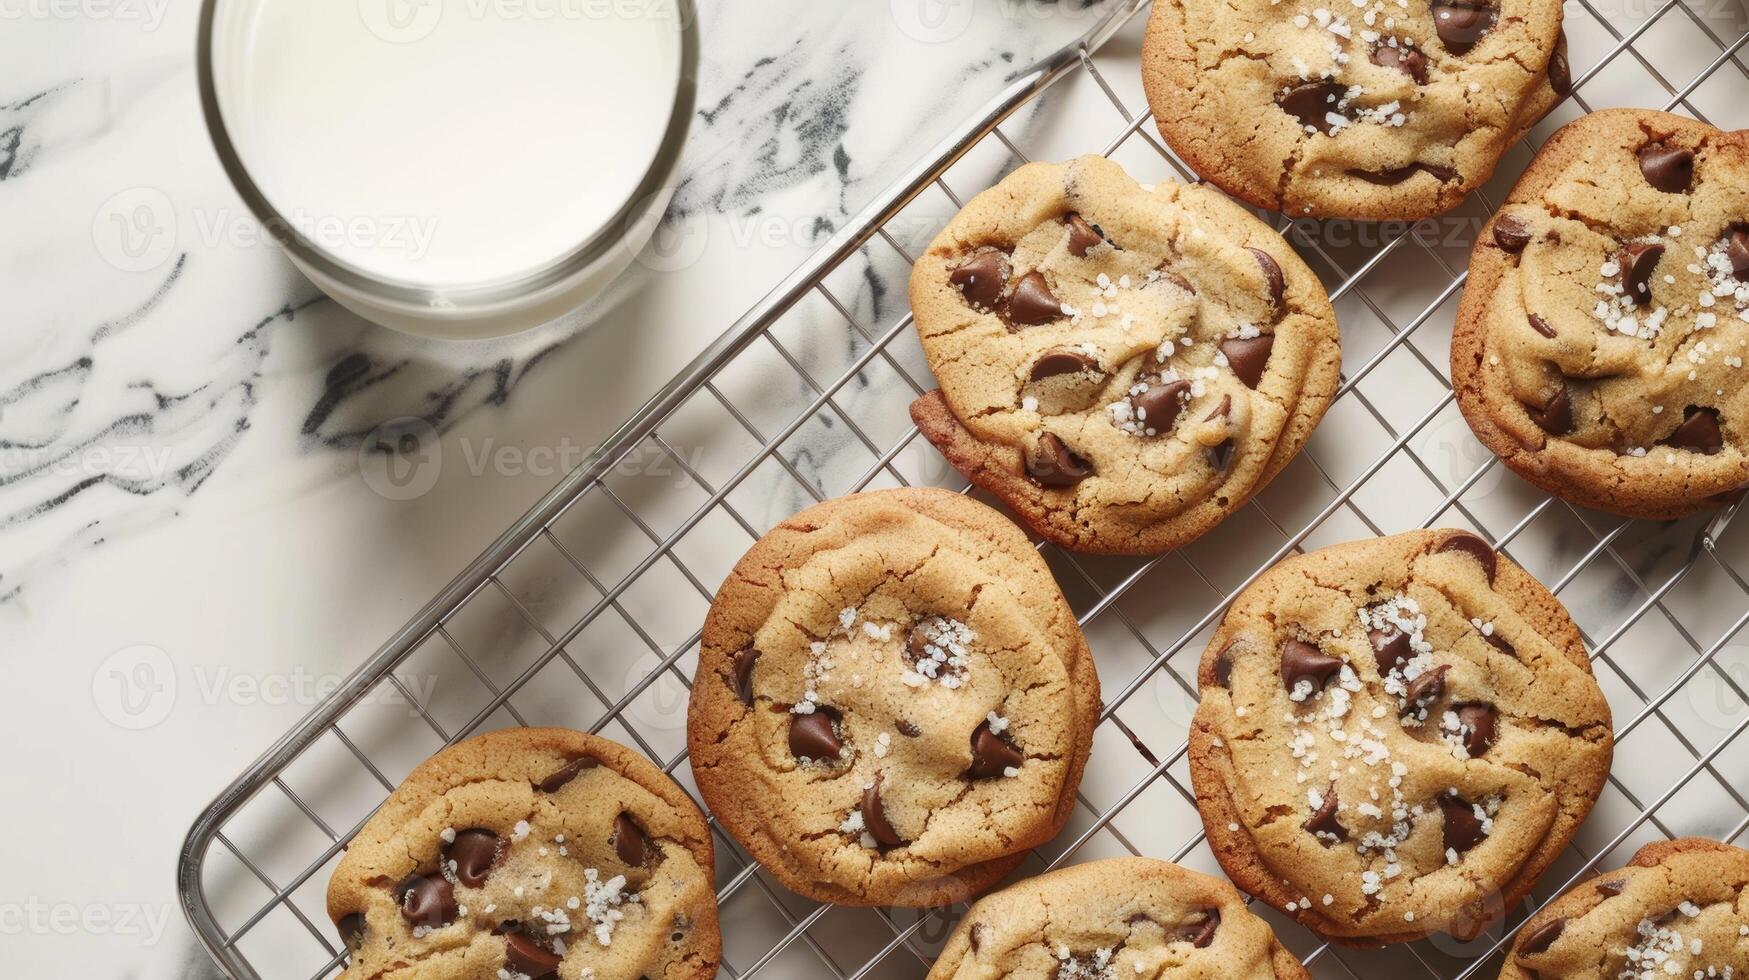 A tray of chocolate chip cookies sits on a counter next to a glass of milk photo